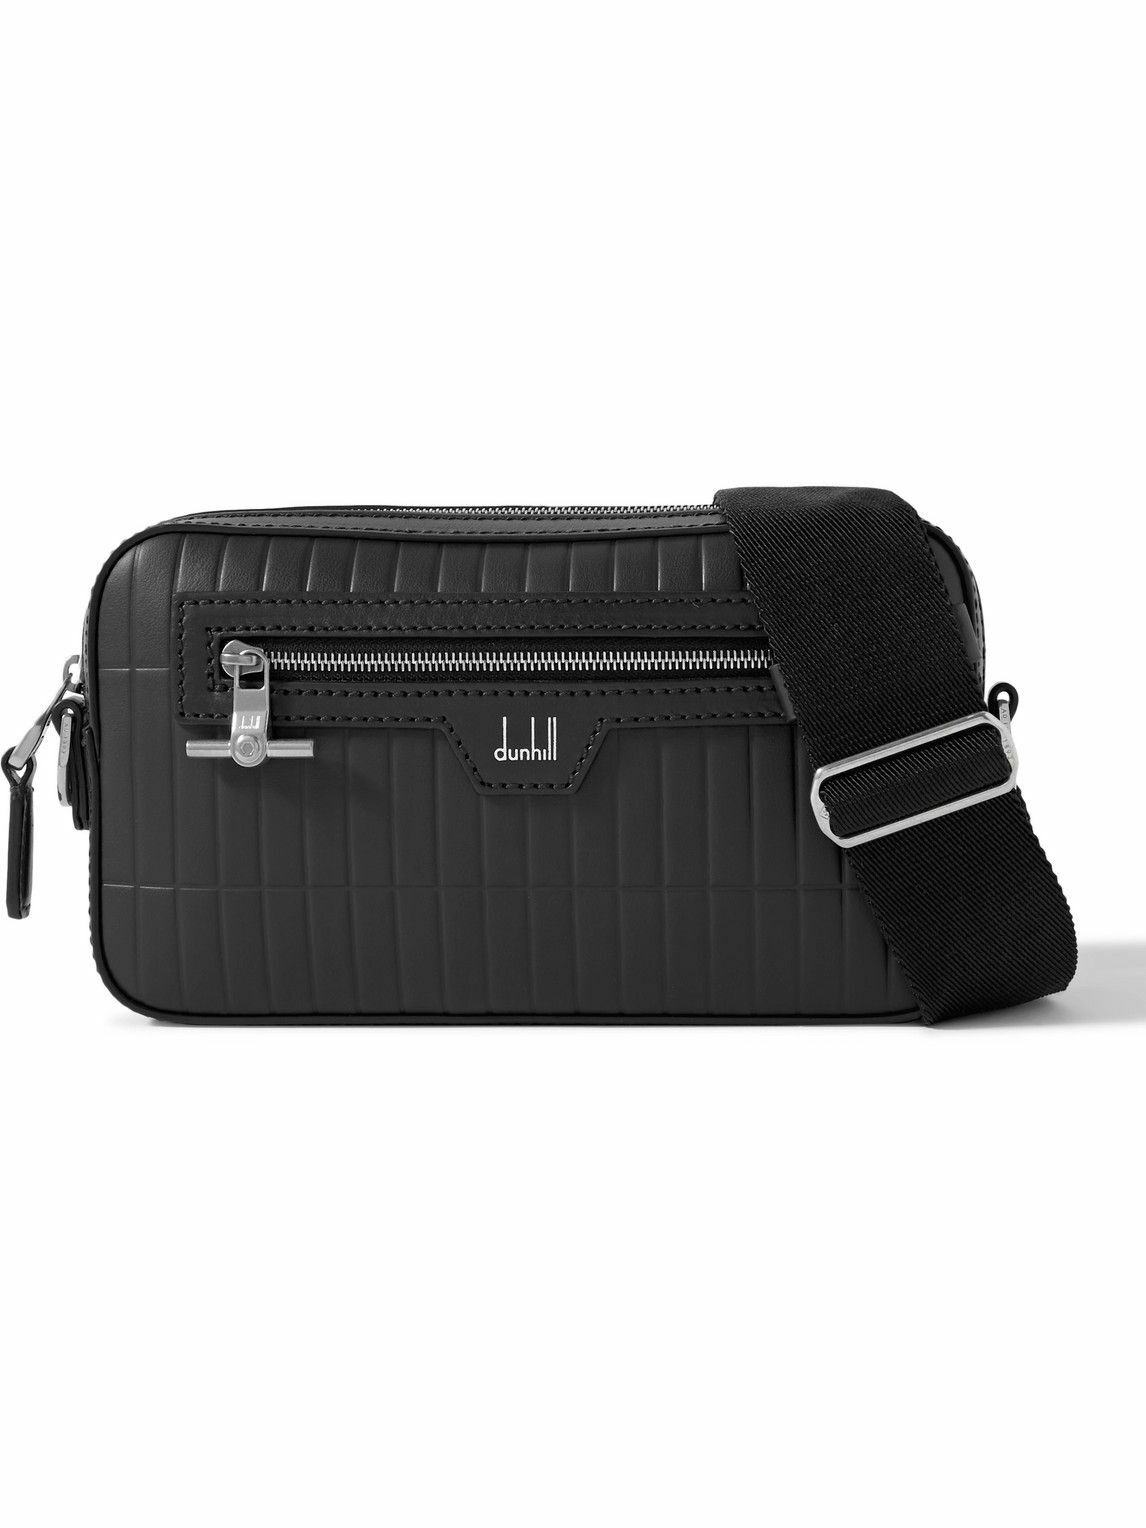 Dunhill - West End Quilted Leather Messenger Bag Dunhill